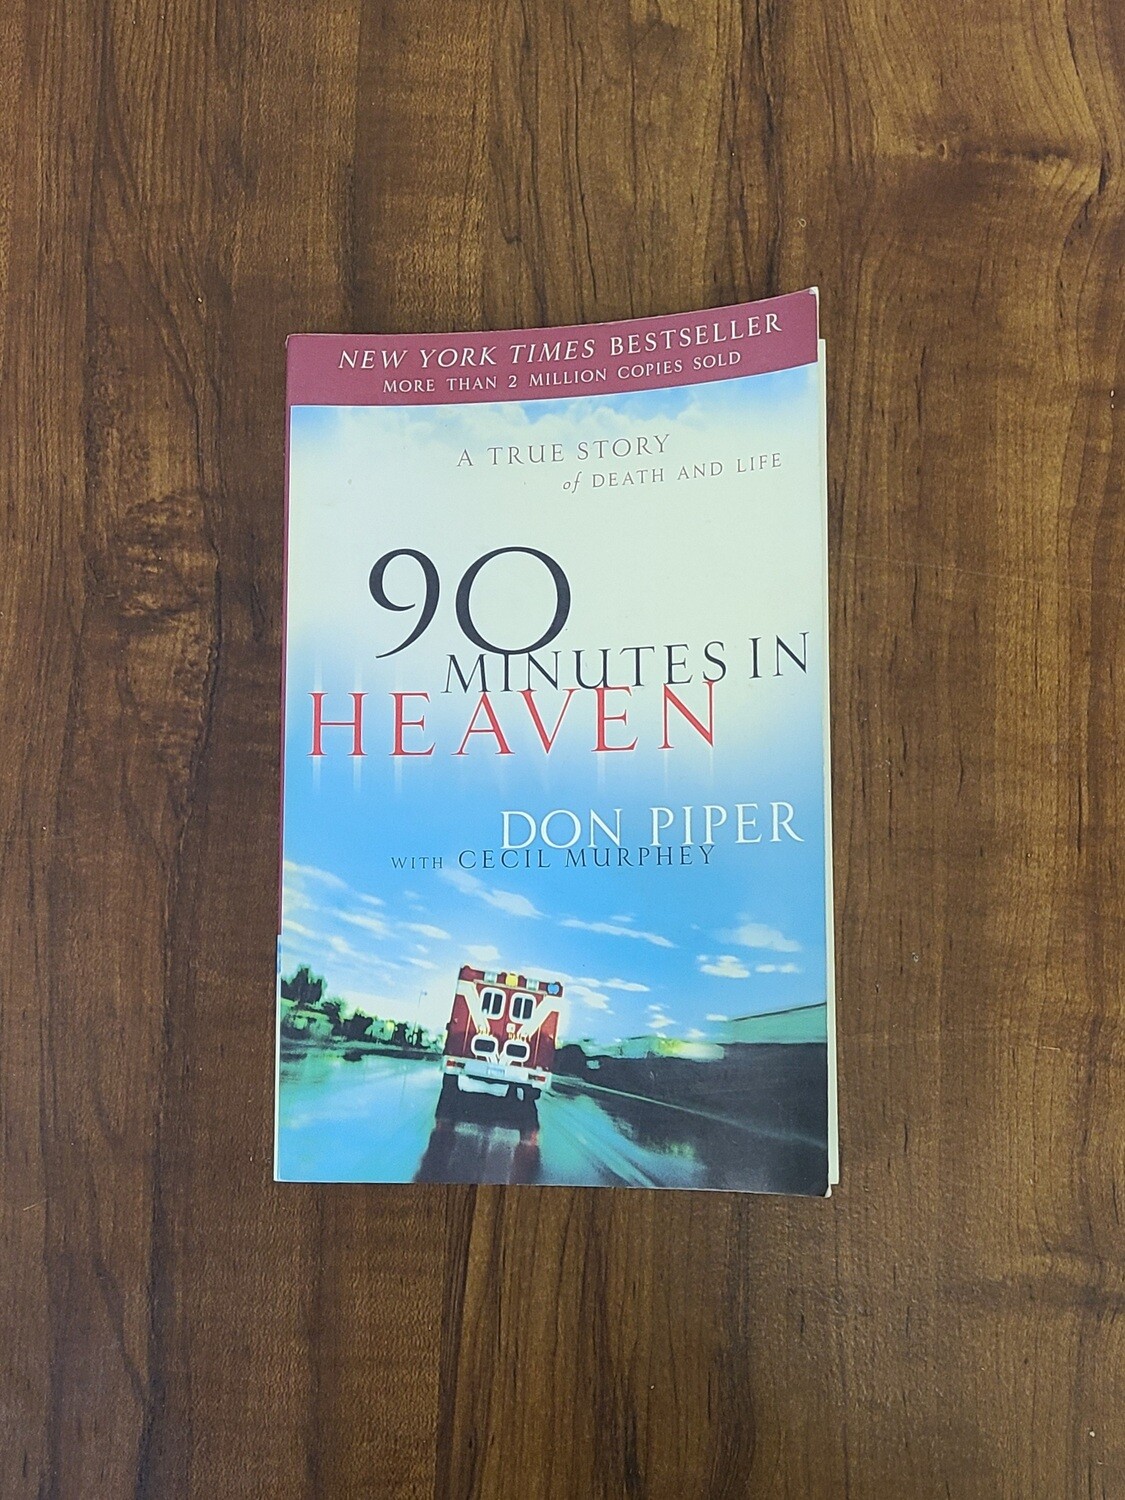 90 Minutes in Heaven by Don Piper with Cecil Murphey